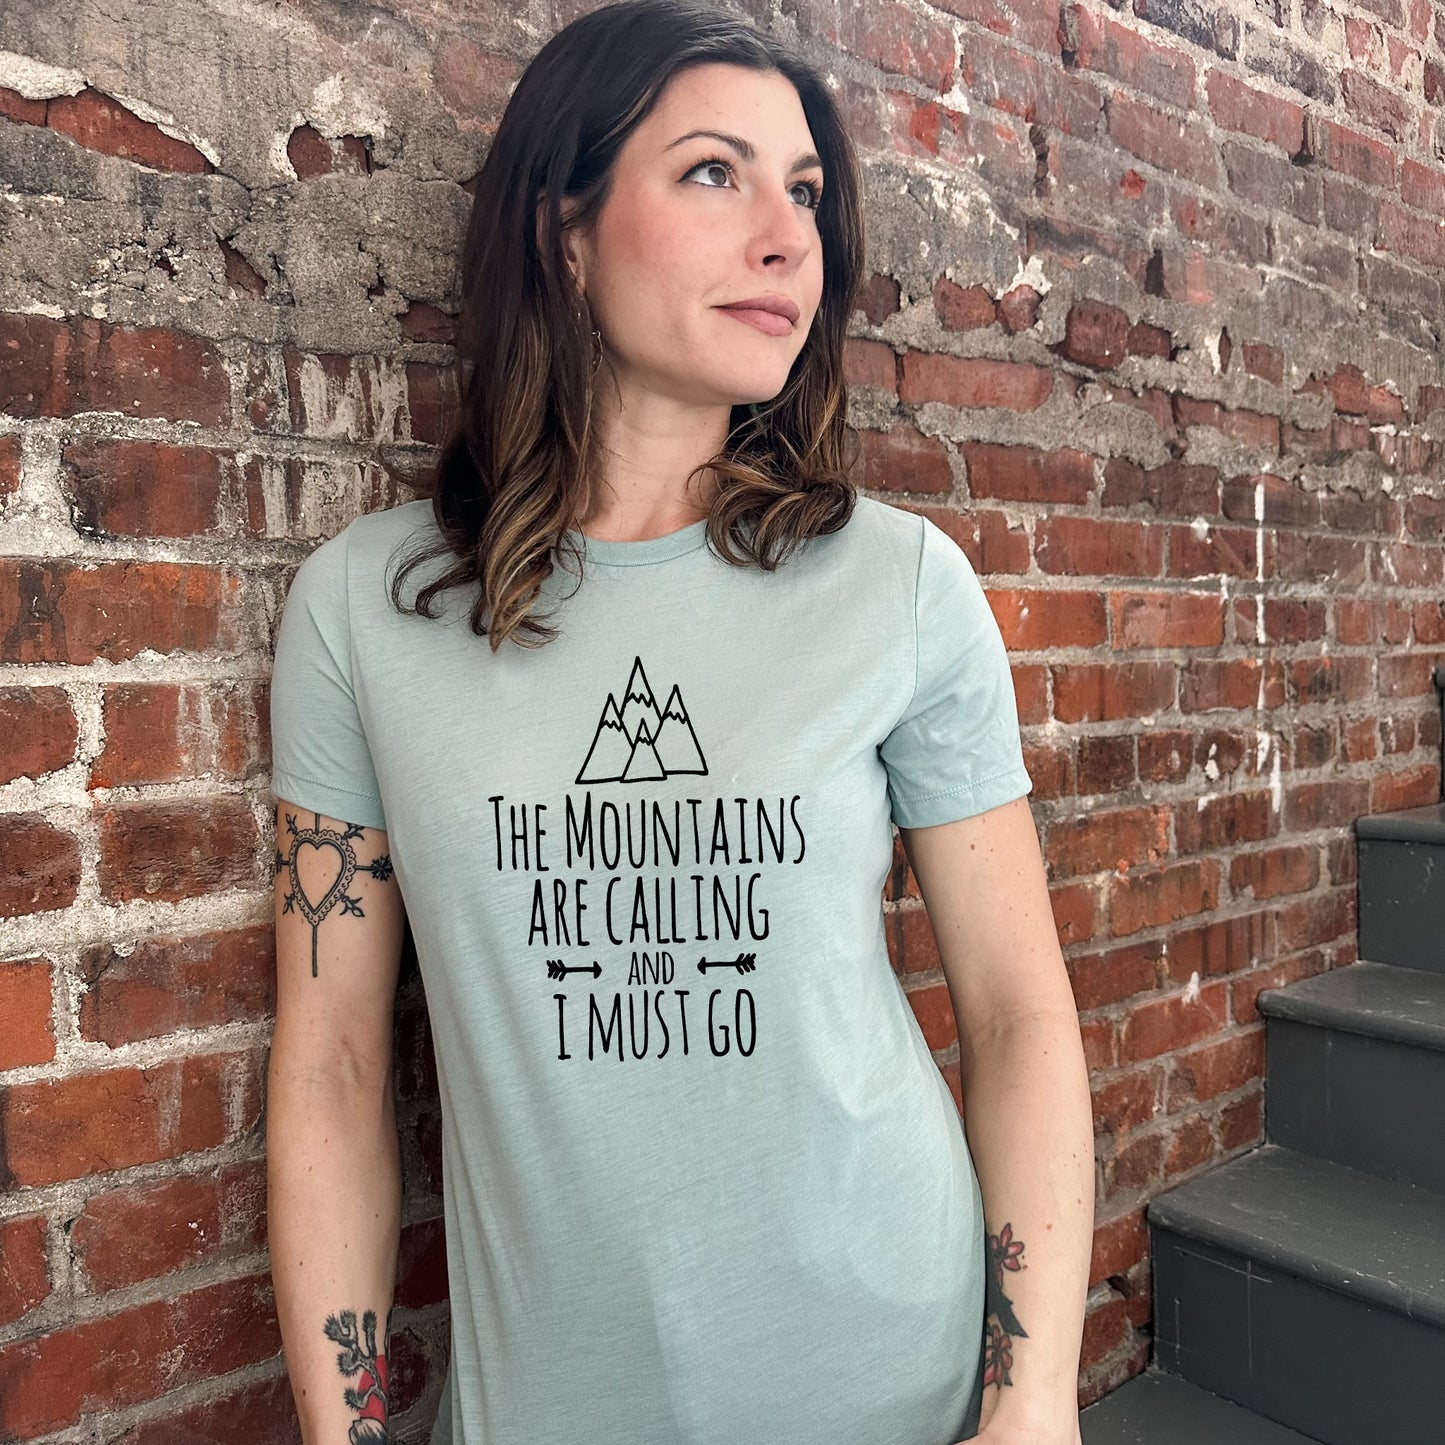 The Mountains Are Calling And I Must Go - Women's Crew Tee - Olive or Dusty Blue